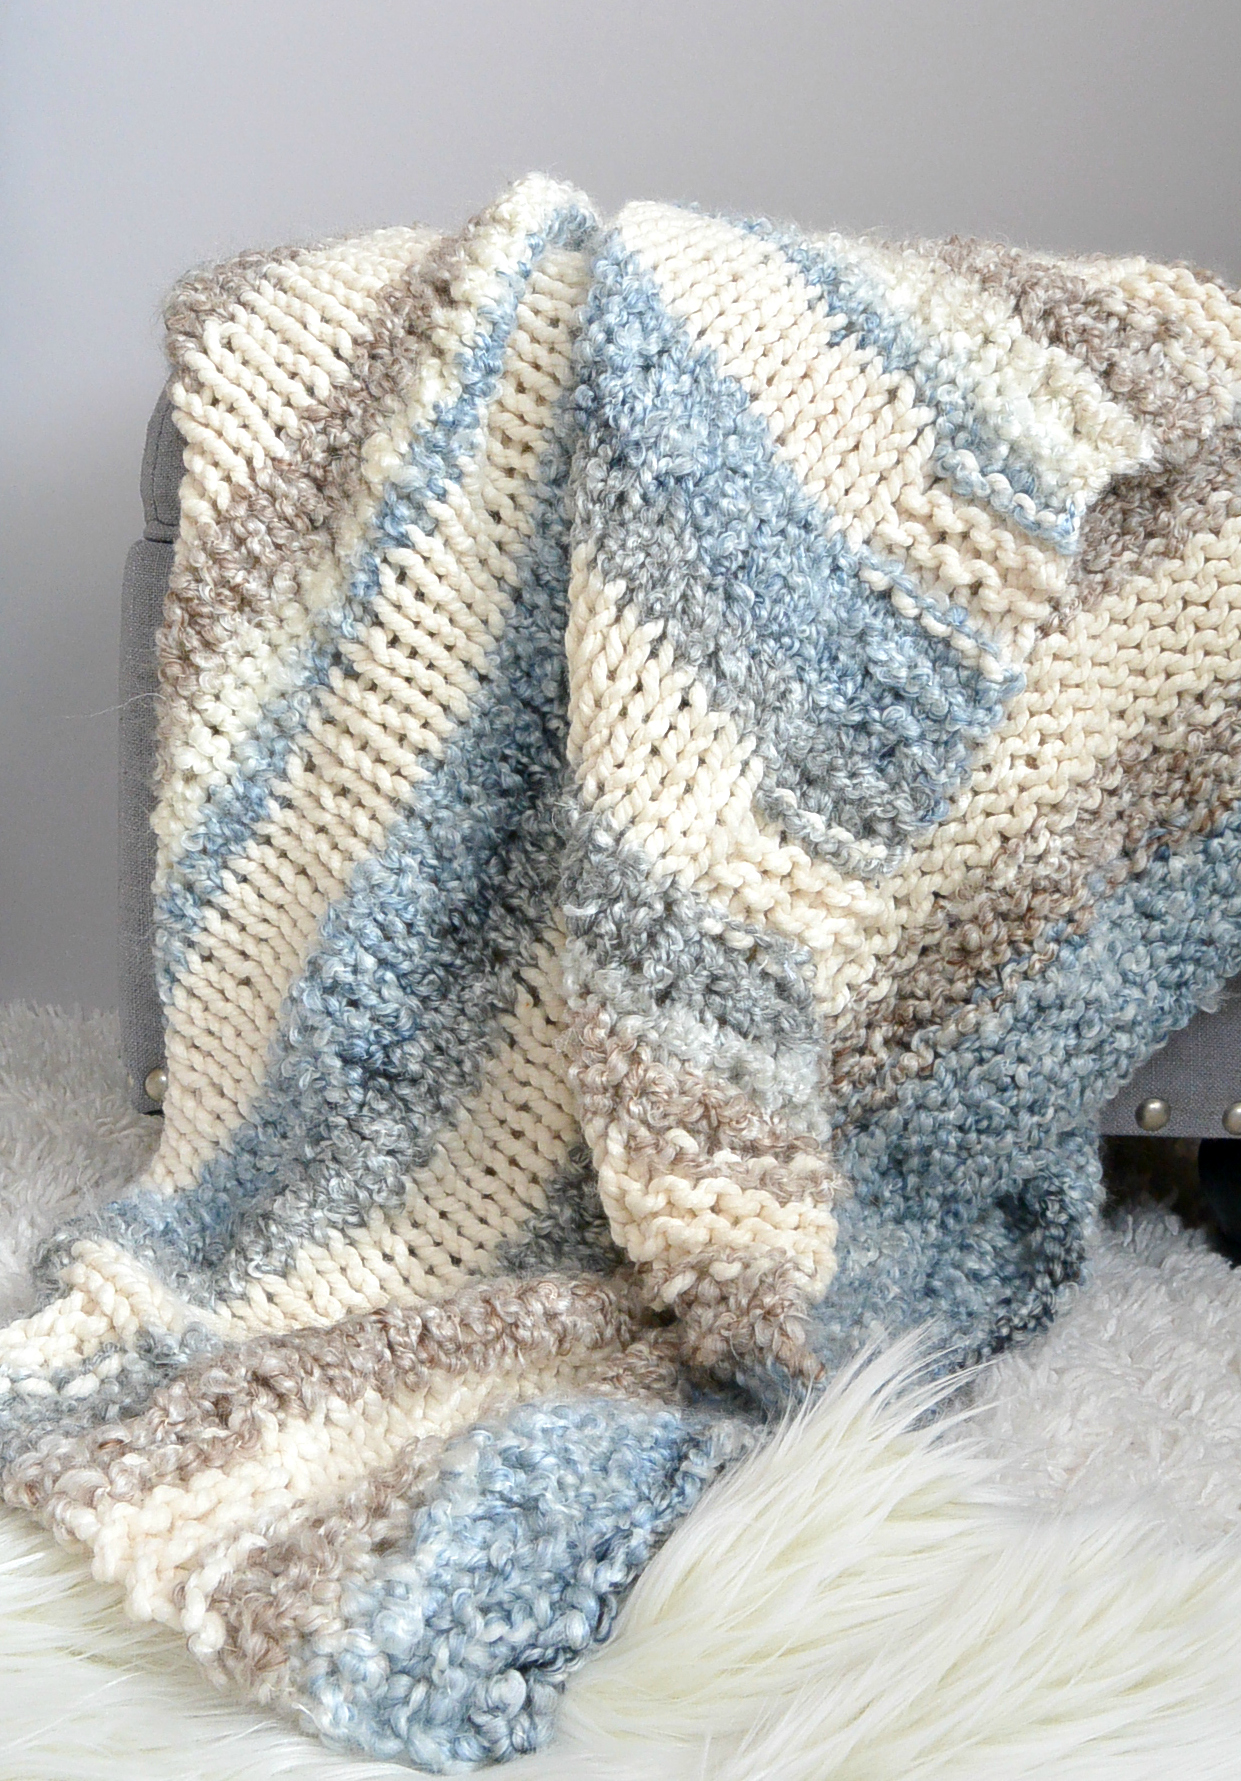 Cuddly Quick Knit Throw Blanket Pattern - Mama In A Stitch